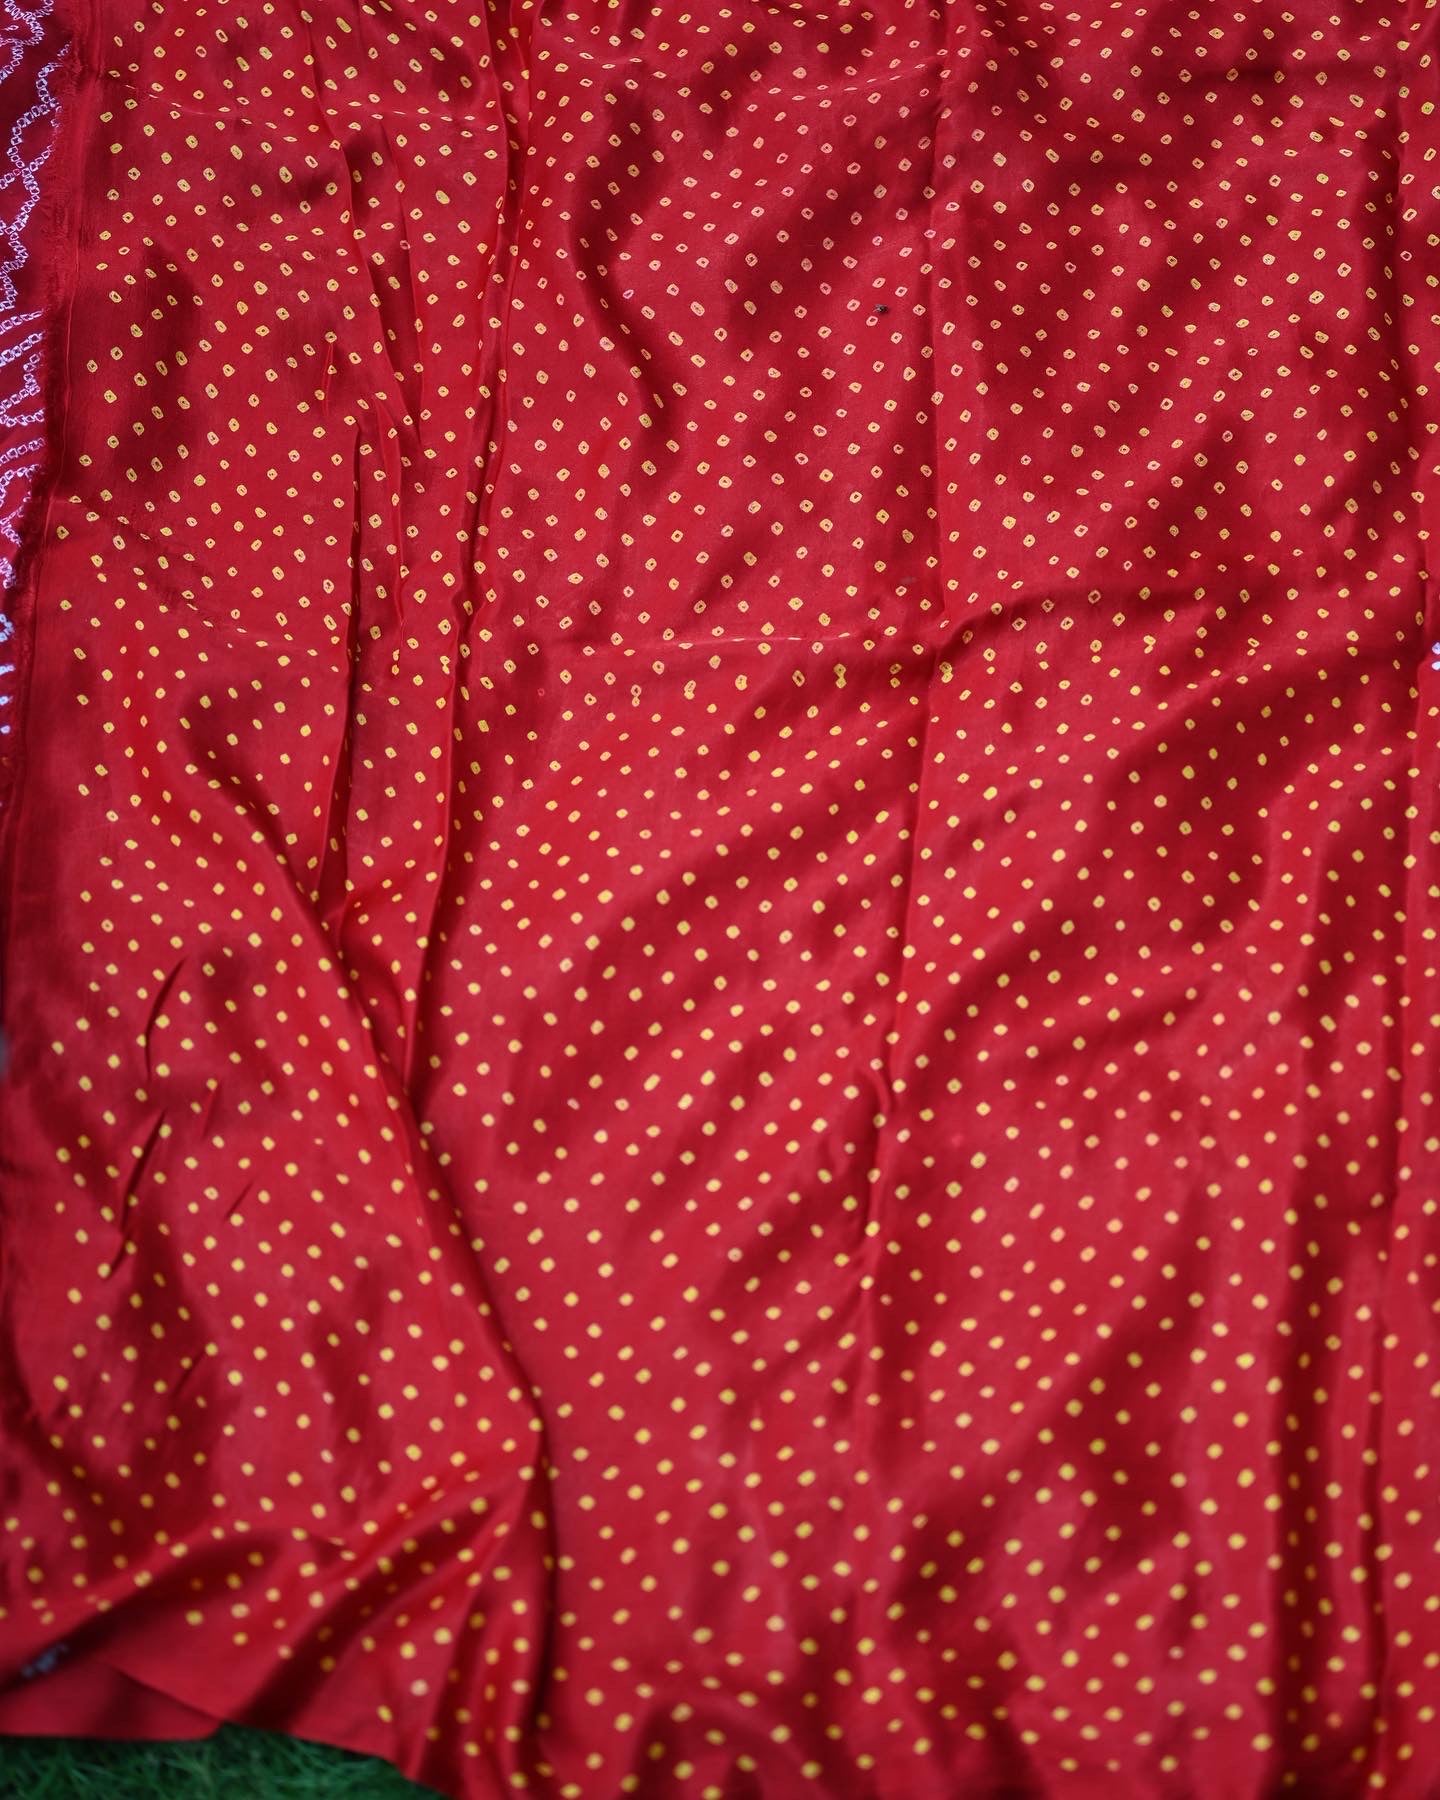 Pure Gajji silk bandhani saree with different pattern all over